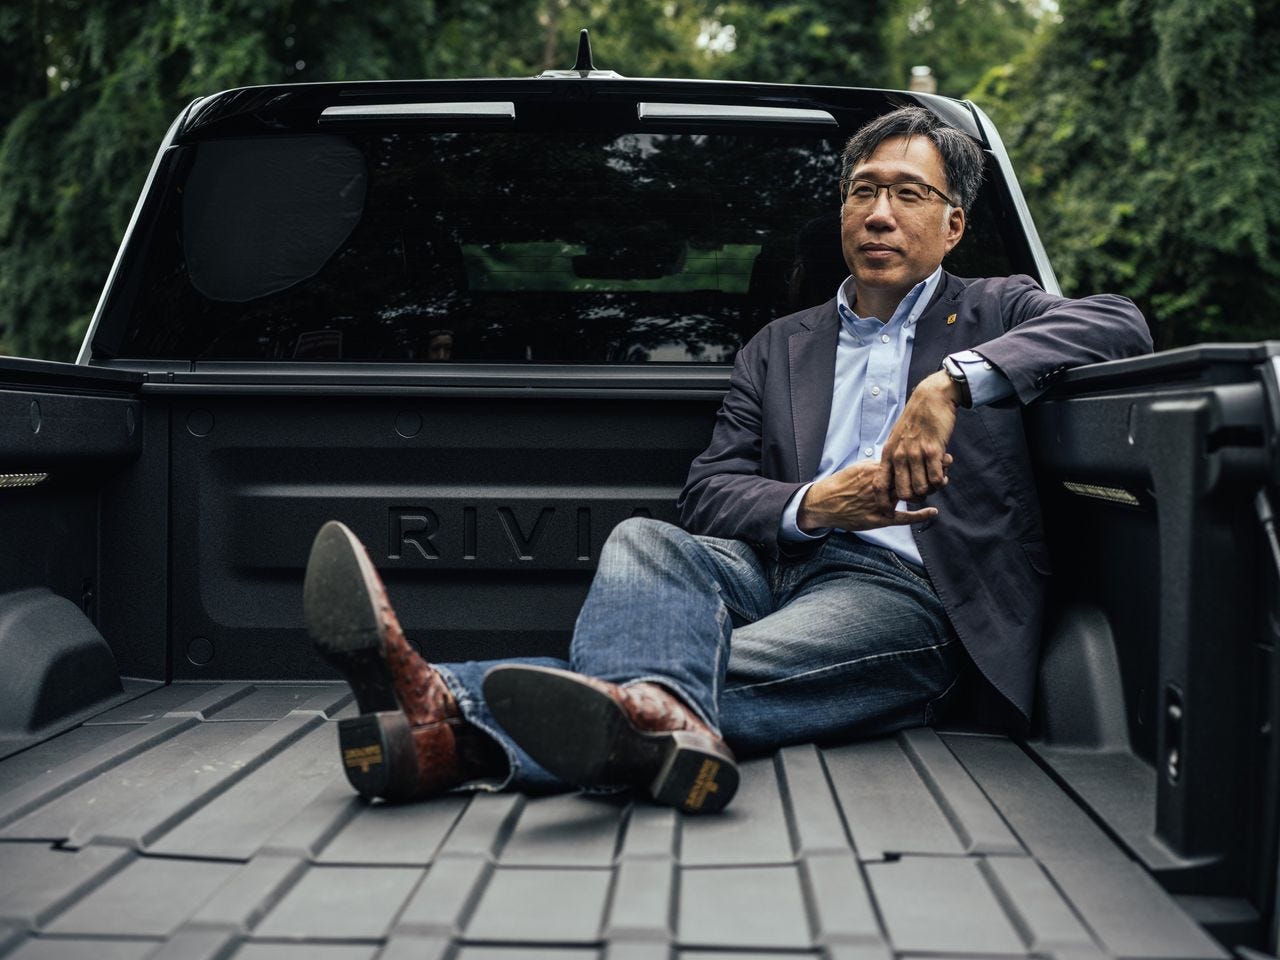 The Man From Rivian Who Wants to Change How We Buy Cars - WSJ